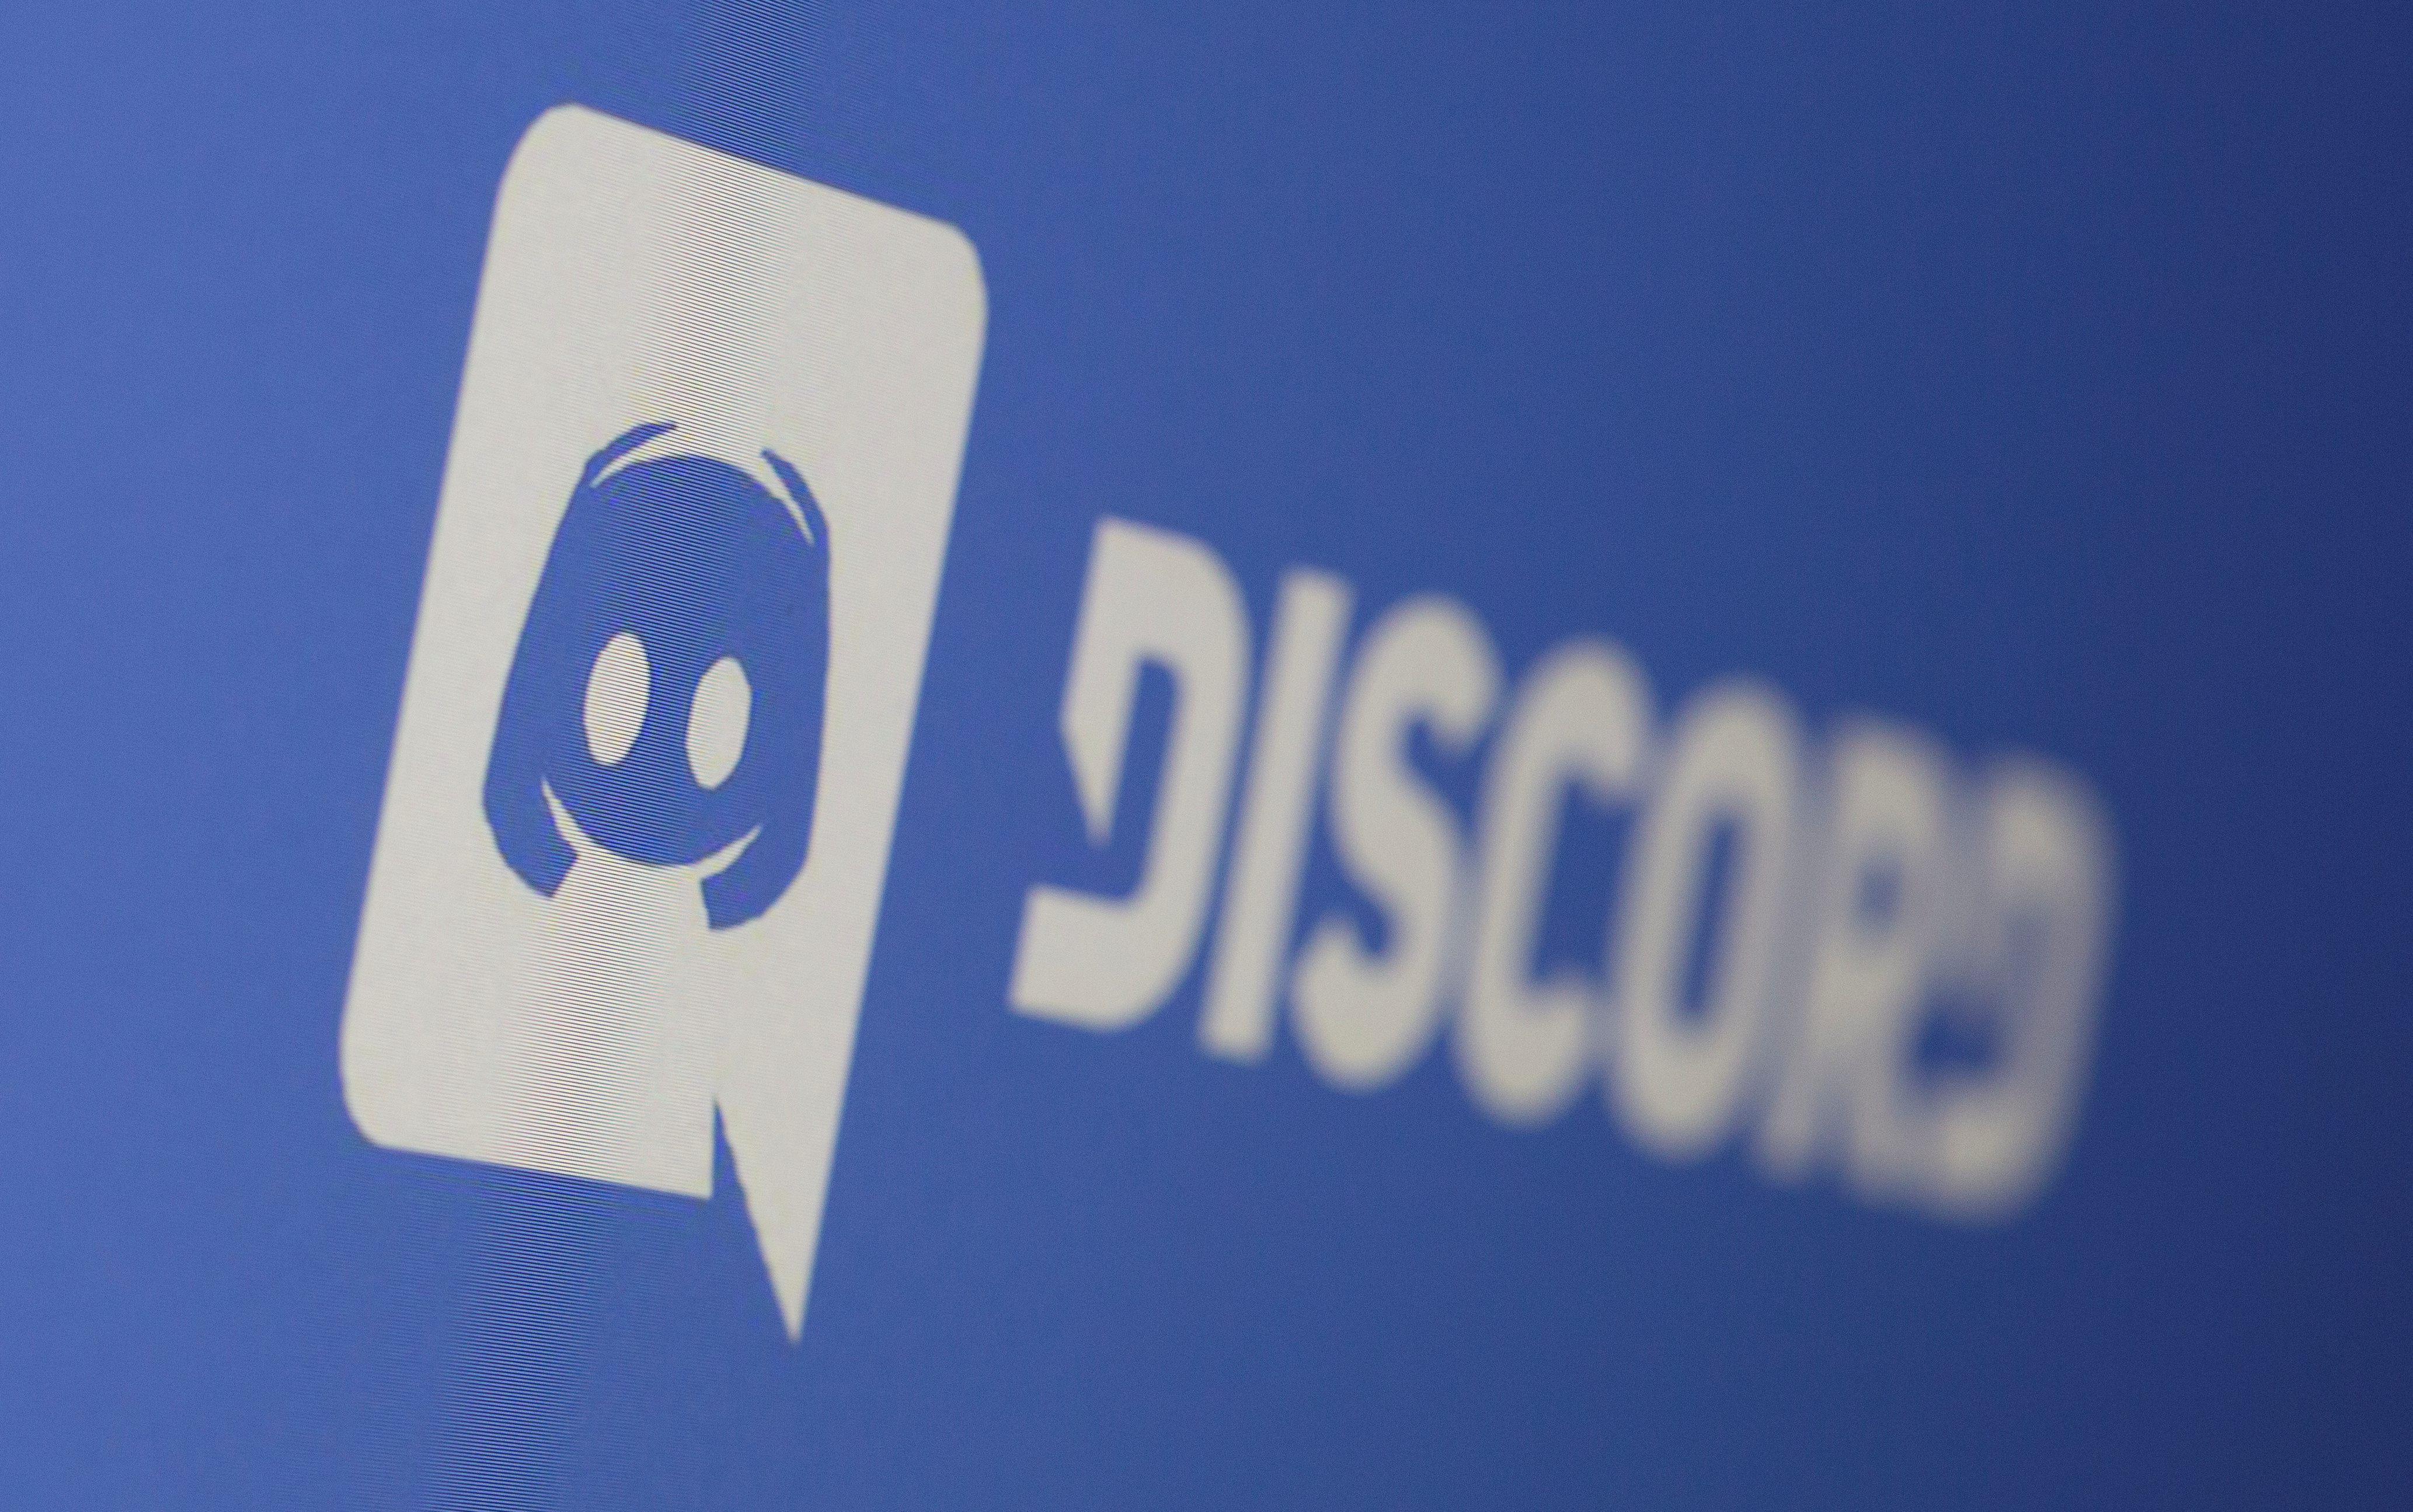 Discord (still) has a child safety issue